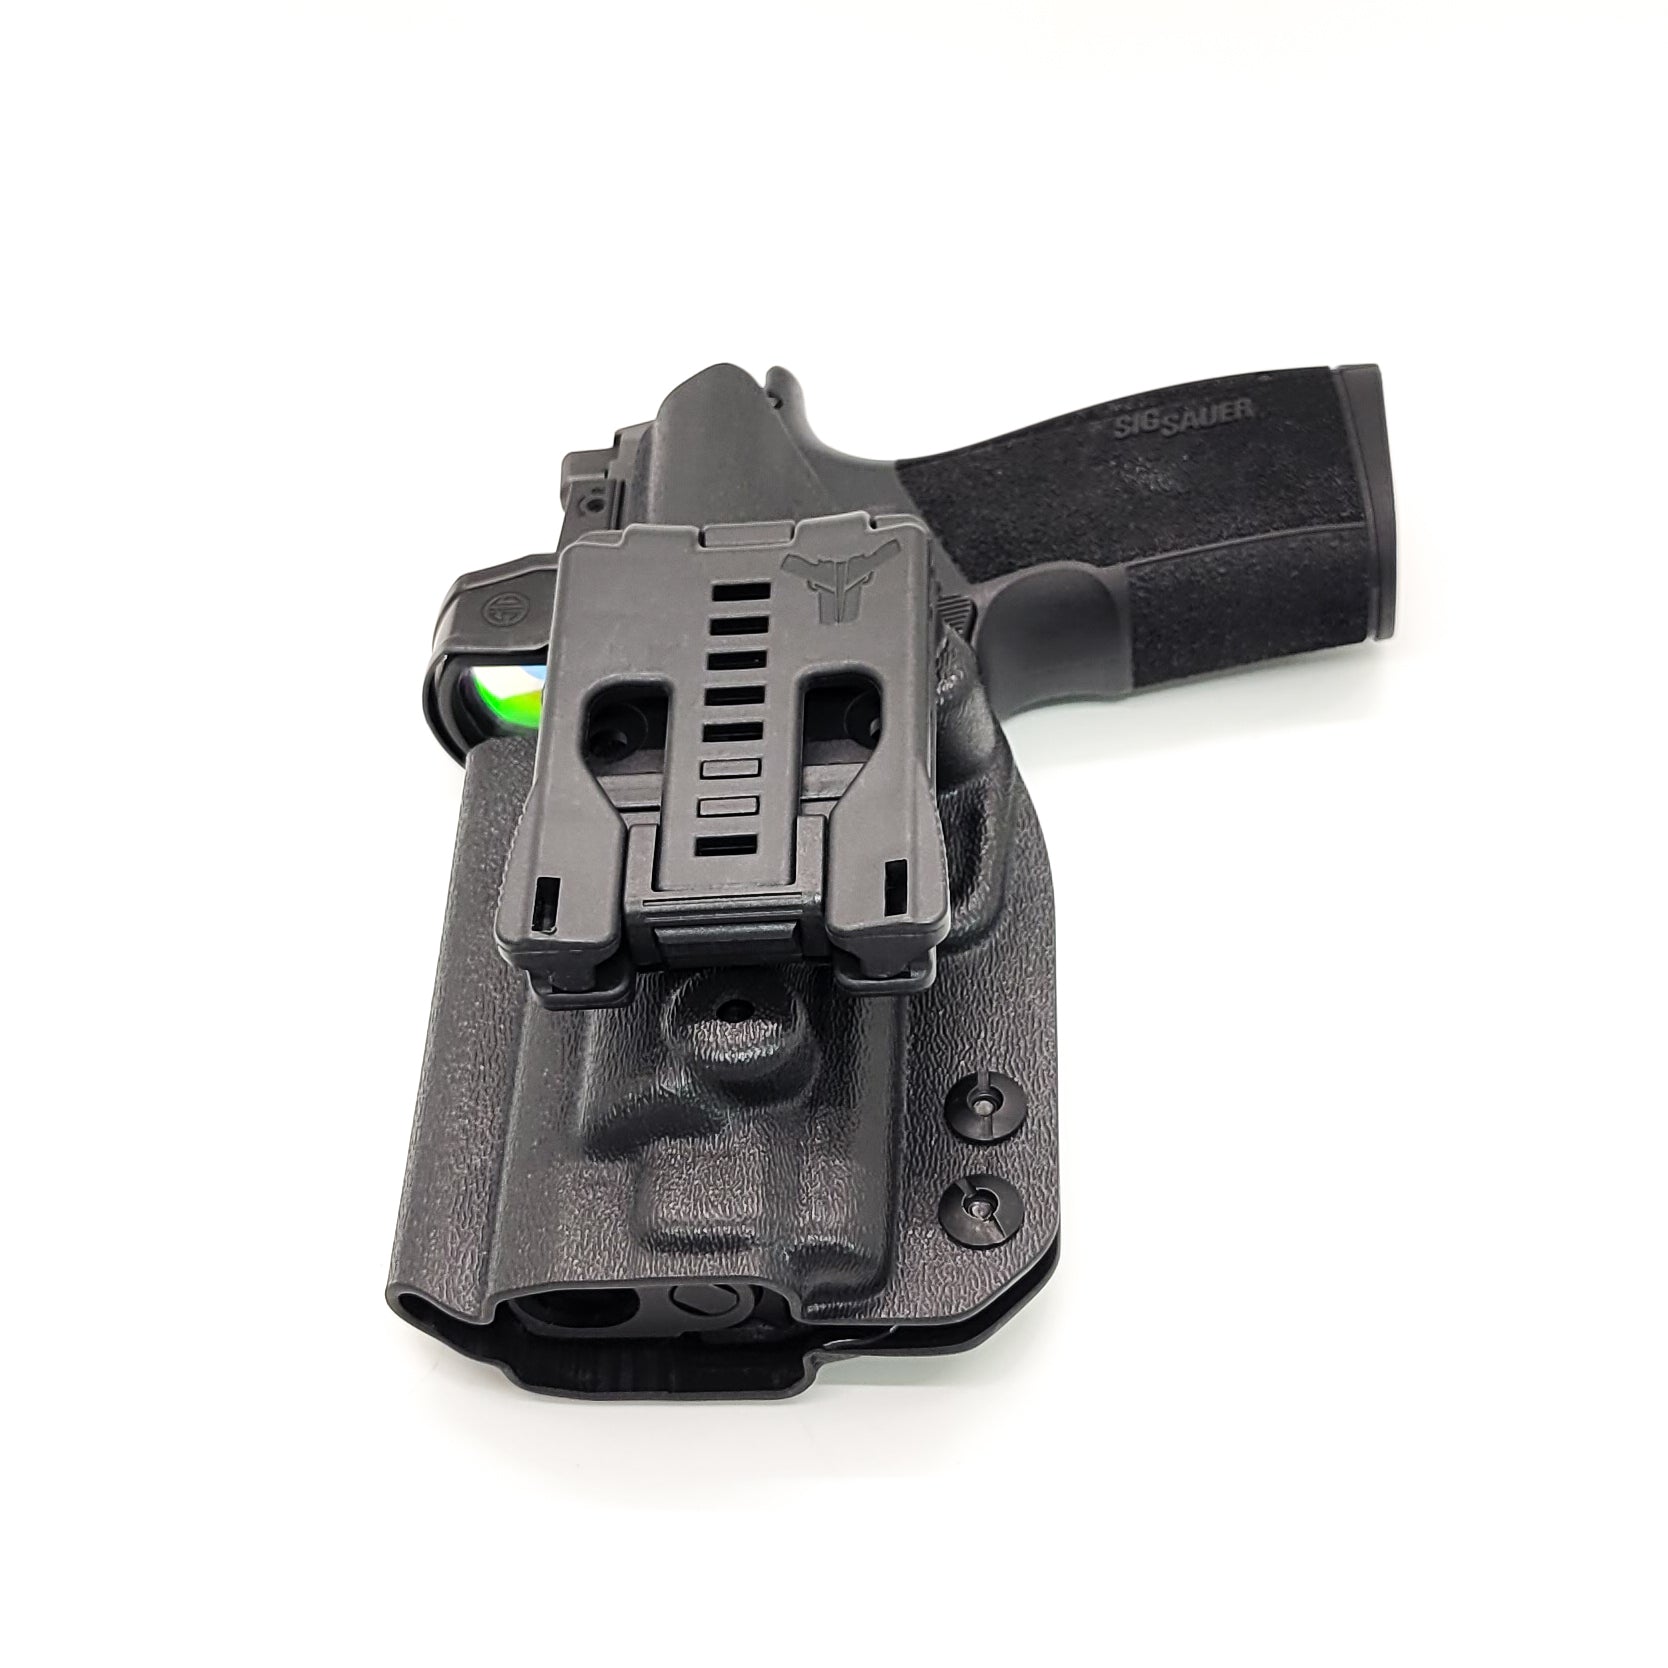 For the best, most comfortable Outside Waistband OWB Kydex Holster designed to fit the Sig Sauer P365-XMACRO, P365-XMACRO COMP, P365-XMACRO TACOPS, and P365-XMACRO COMP ROMEOZERO ELITE. with the GoGunsUSA Gas Pedal. shop Four Brothers 4BROS holsters. Adjustable retention & cant smooth edges for comfort & concealment 